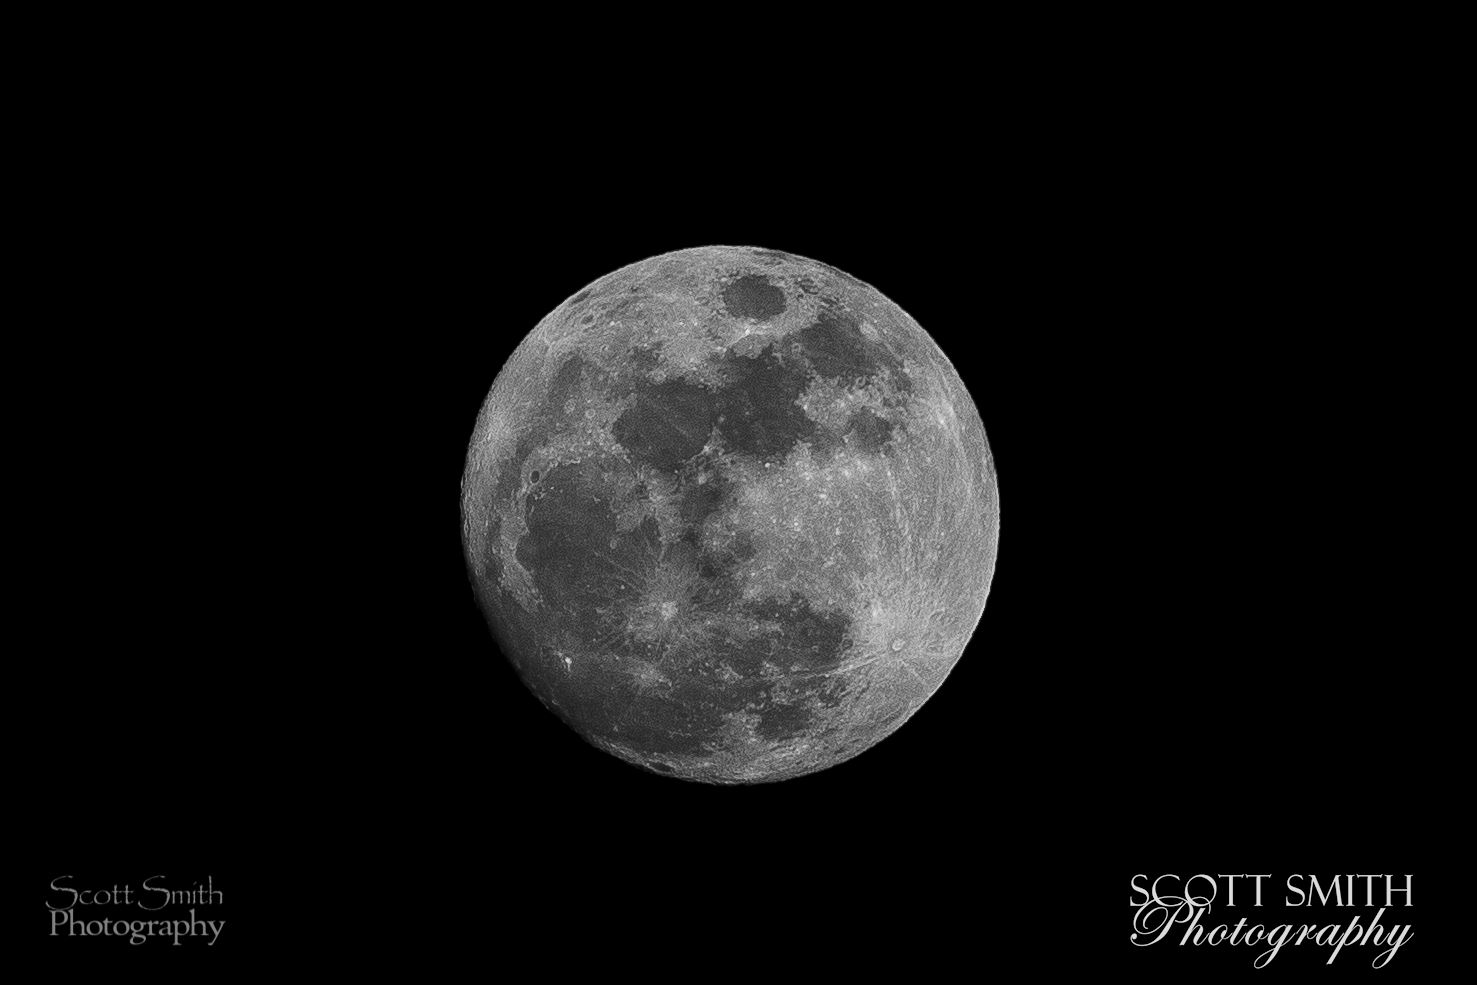 My God, it's Full of Scars! - The moons scars are showing on a clear night. by Scott Smith Photos